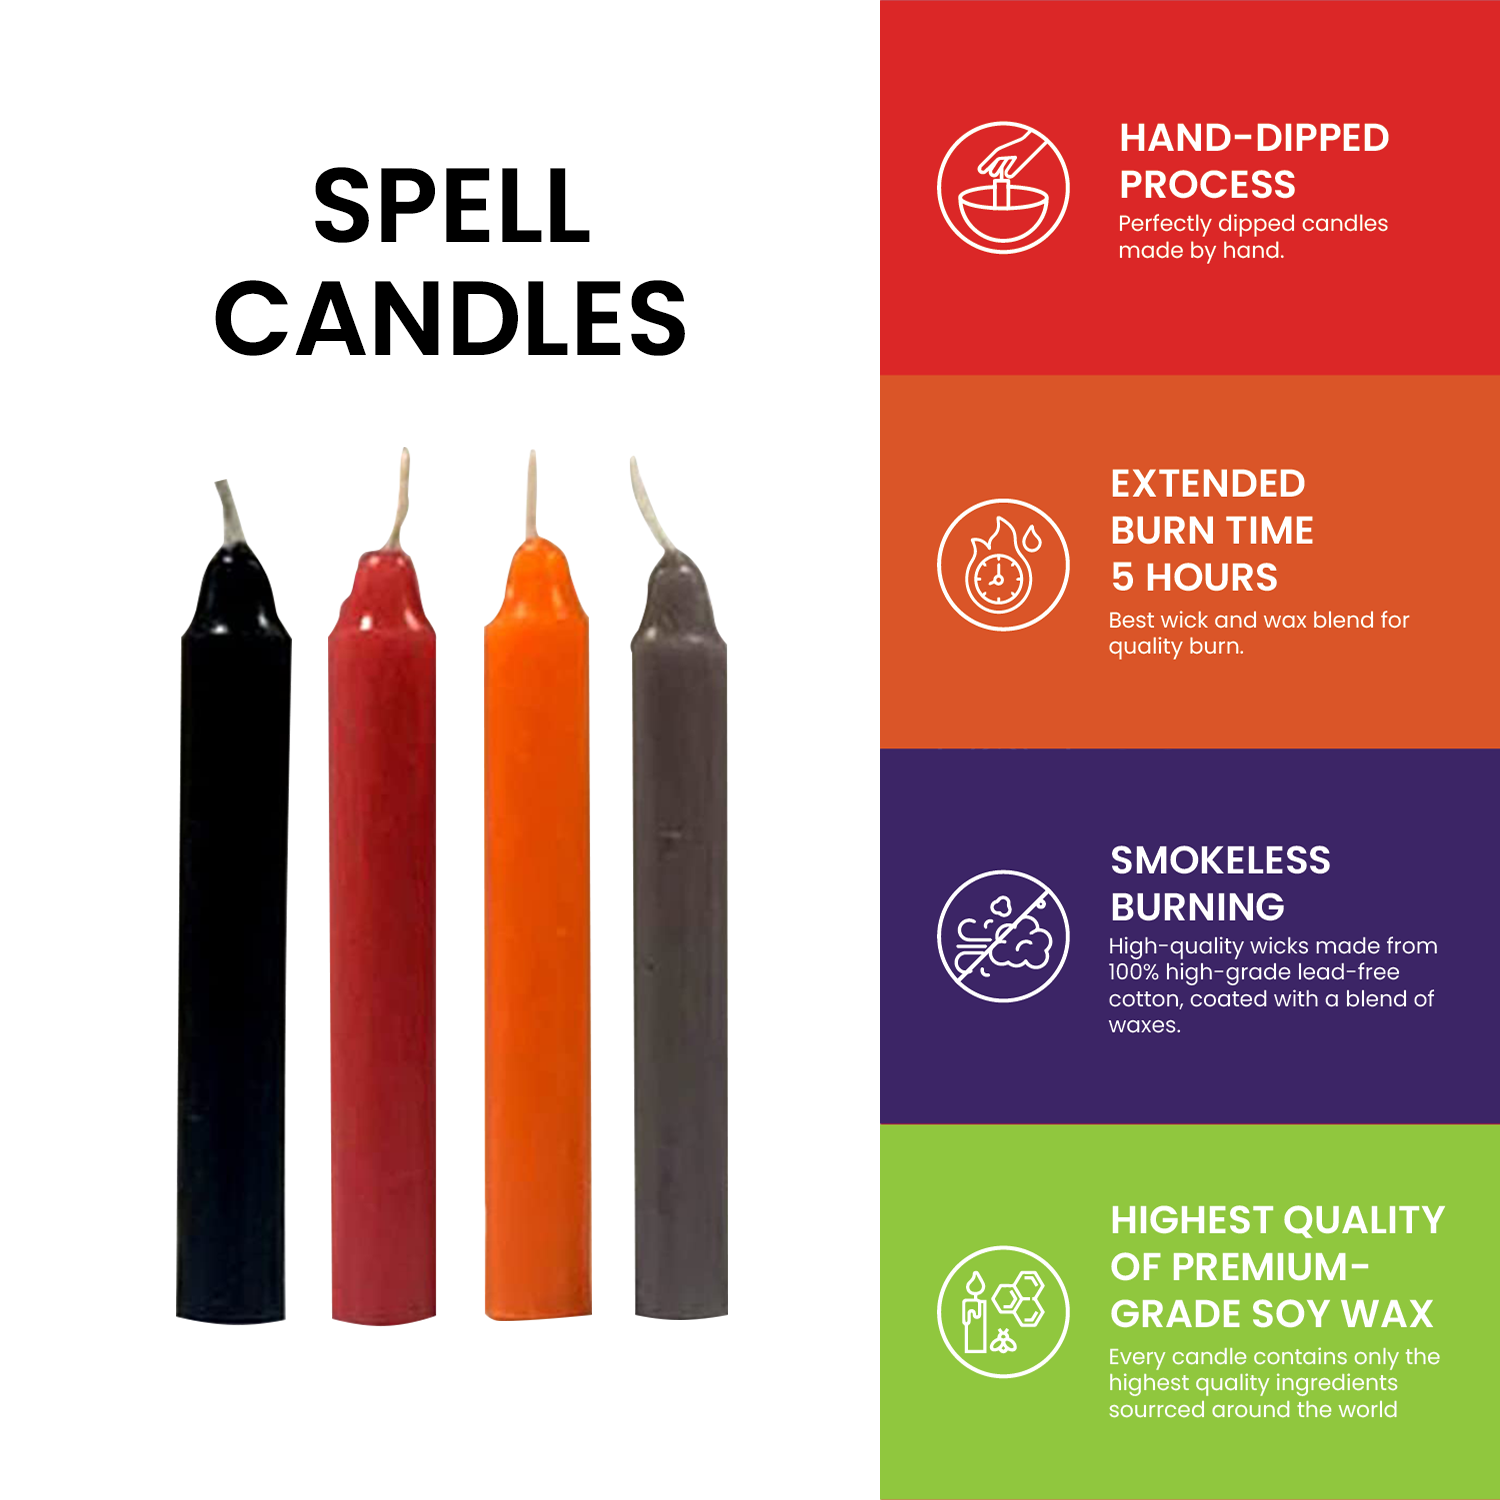 Spell Candles 104 Pack - 8 Colors - 13 Candles per Color, Unscented 5"H X 1/2"D